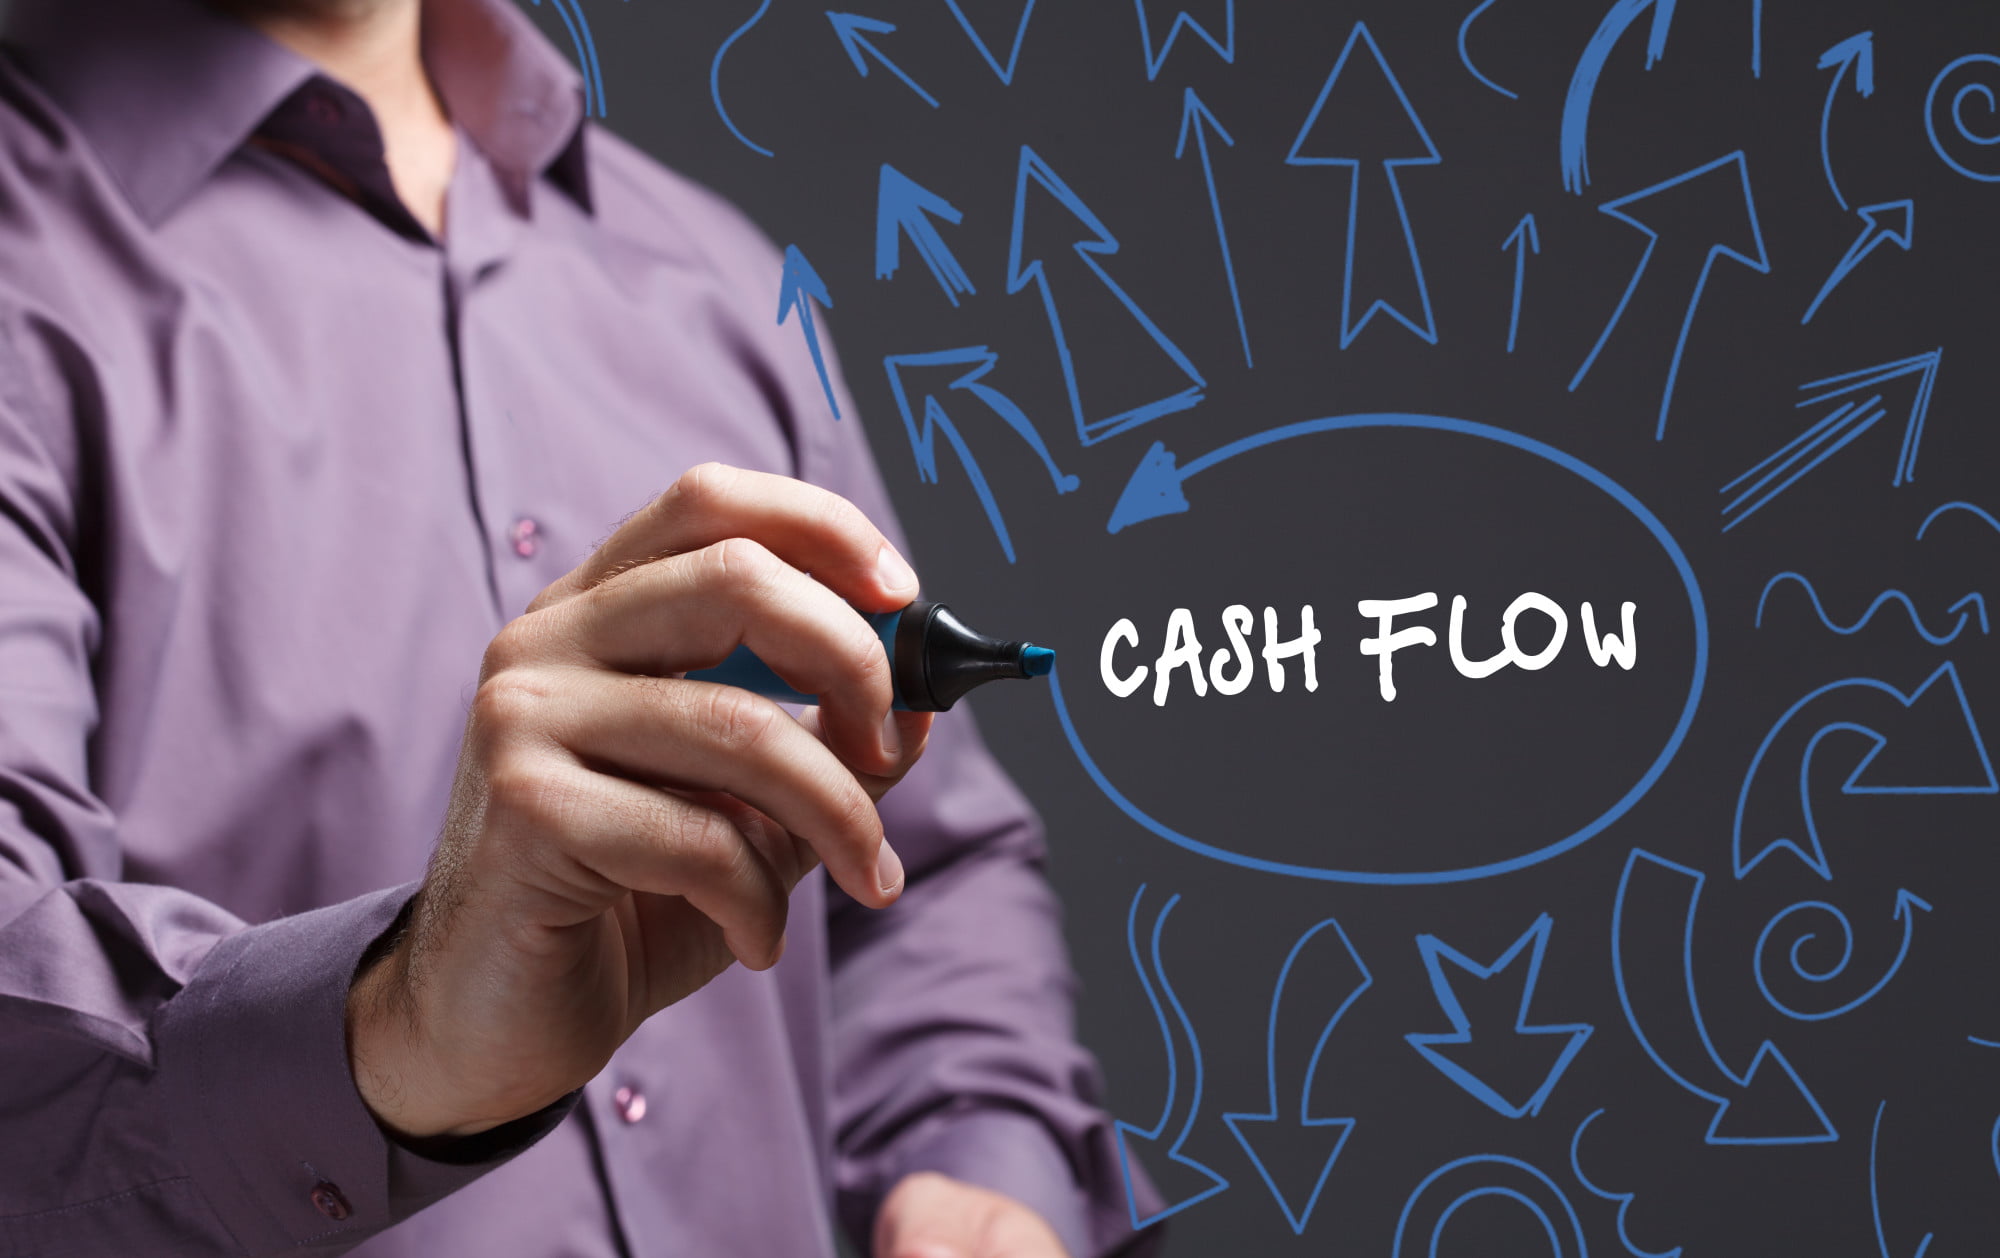 Are you looking to improve business cash flow management? Learn the best techniques in this cash flow optimization guide.